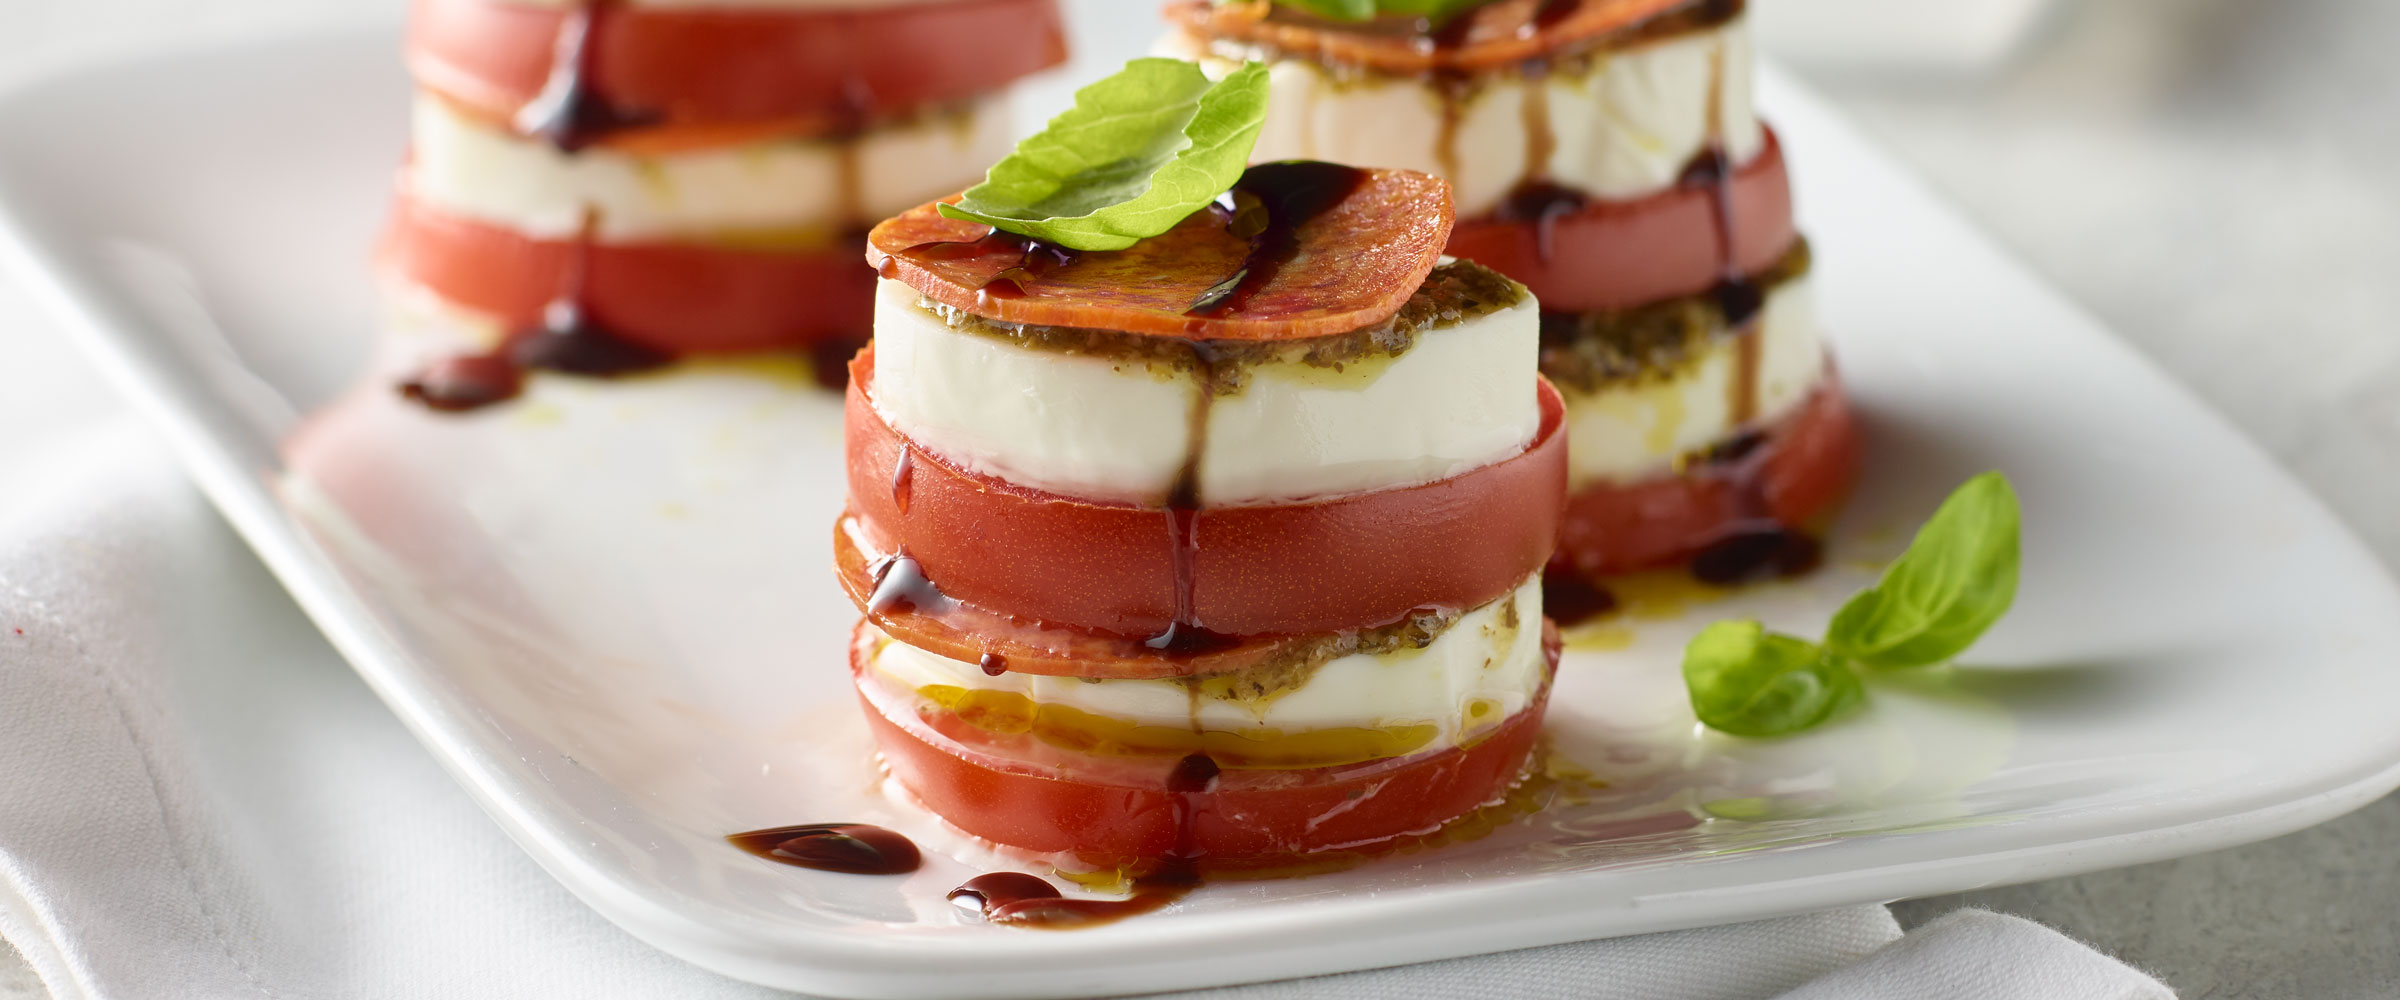 Pepperoni Caprese tower on white plate drizzled with balsamic